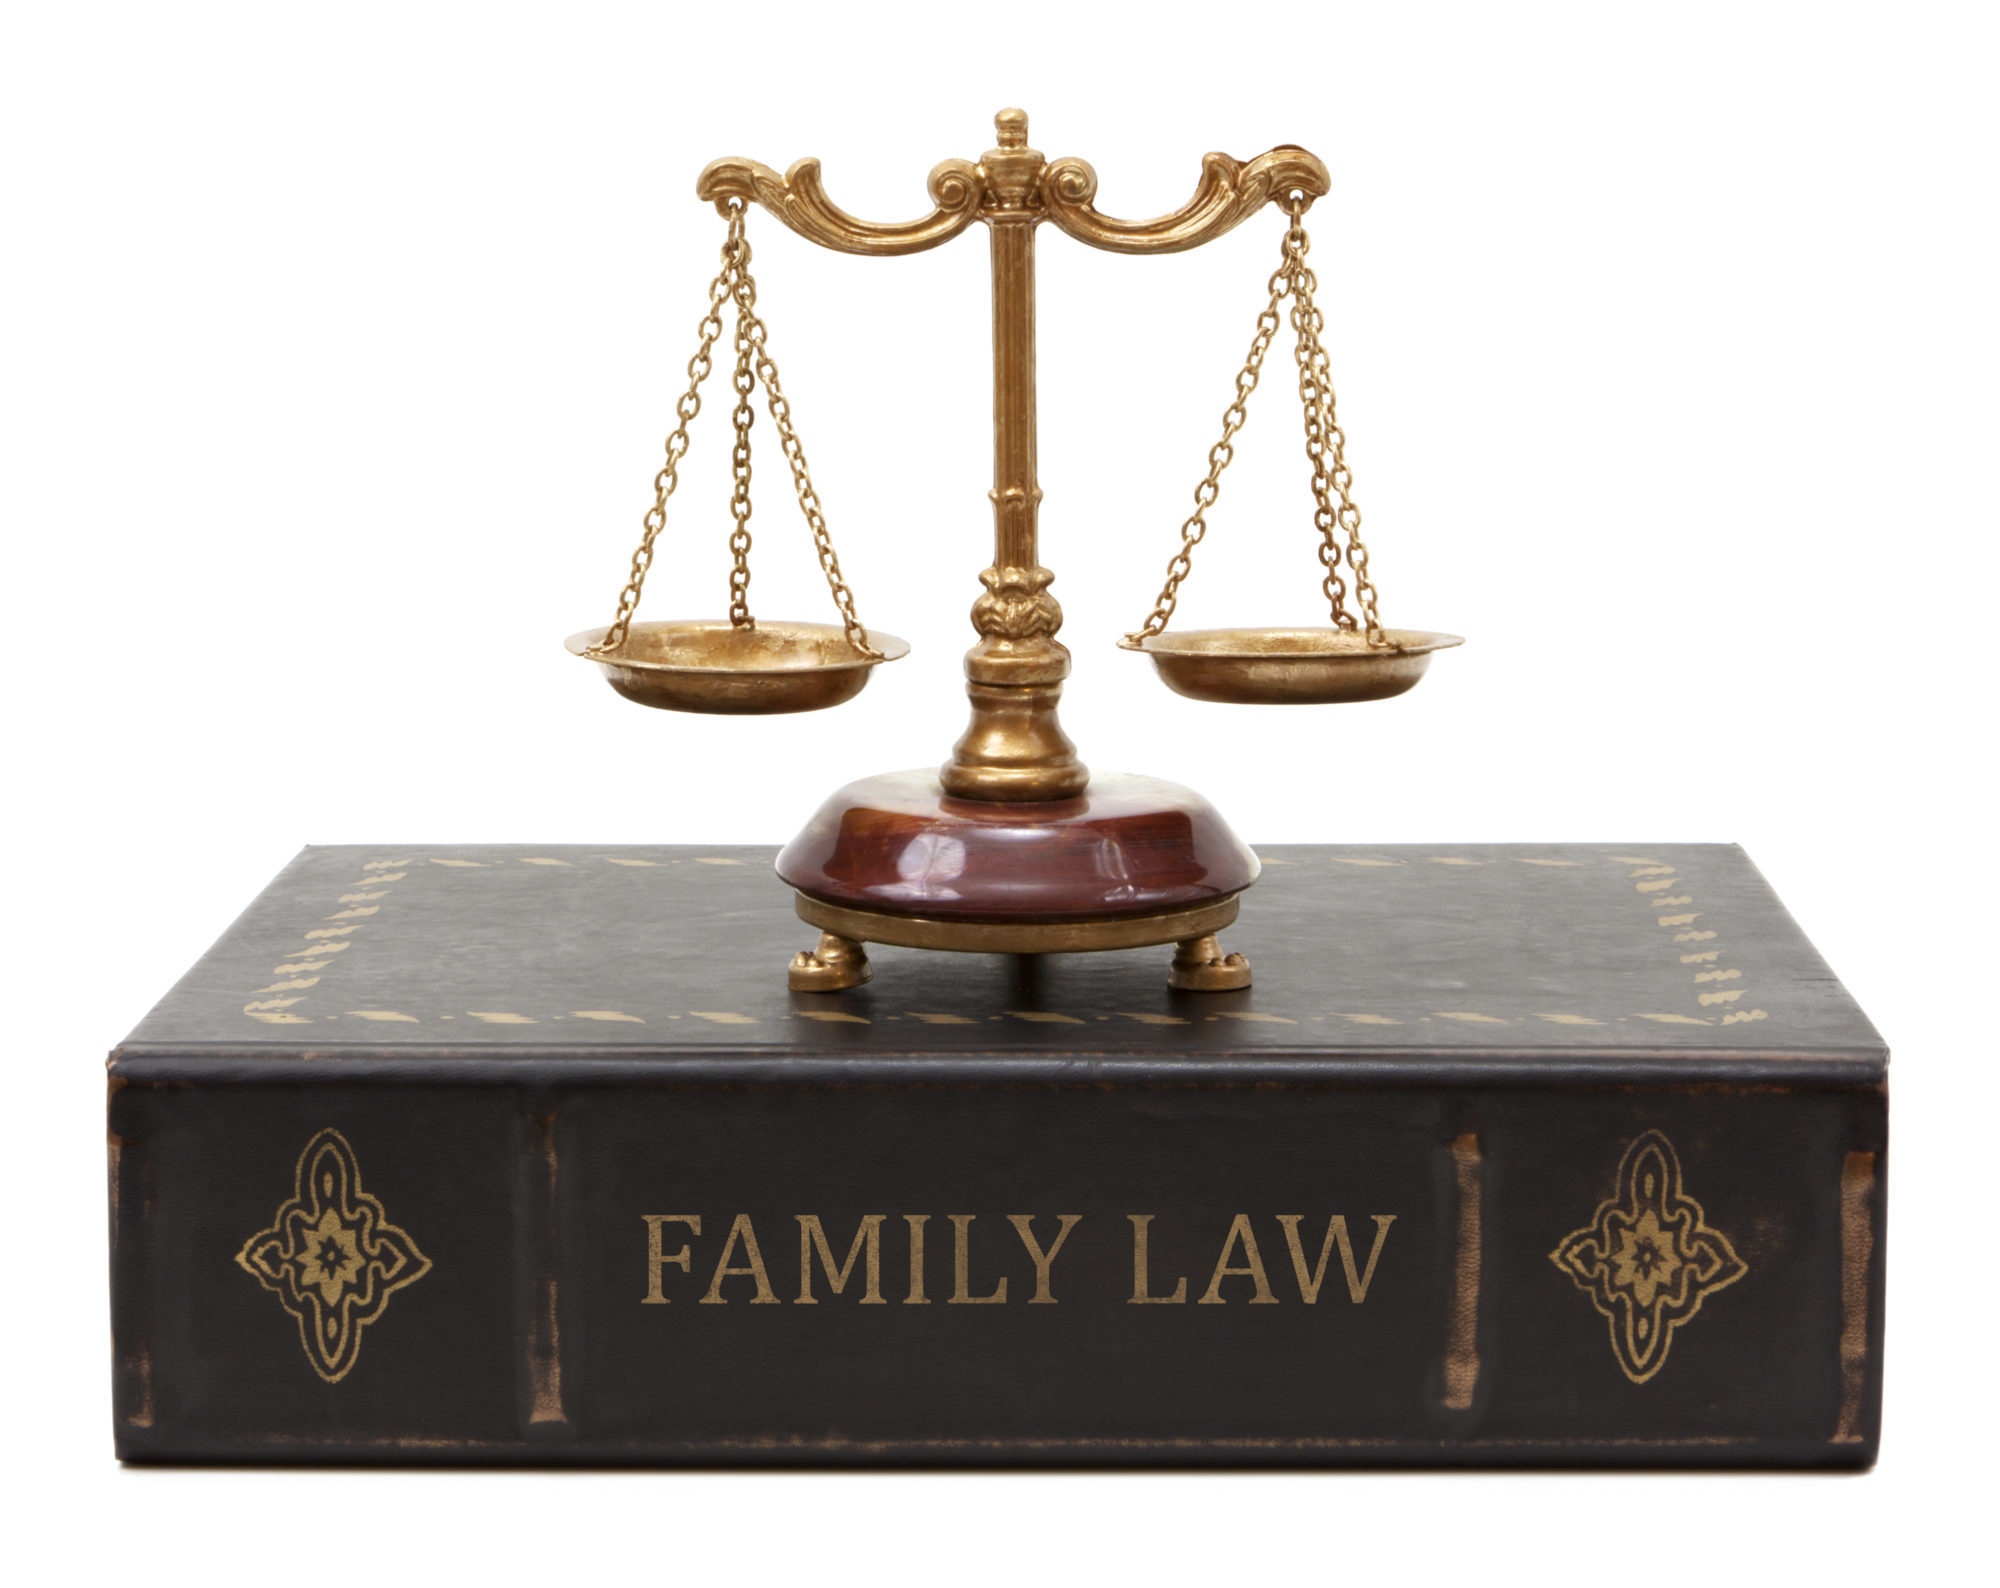 Top 3 Questions In All Family Law Cases